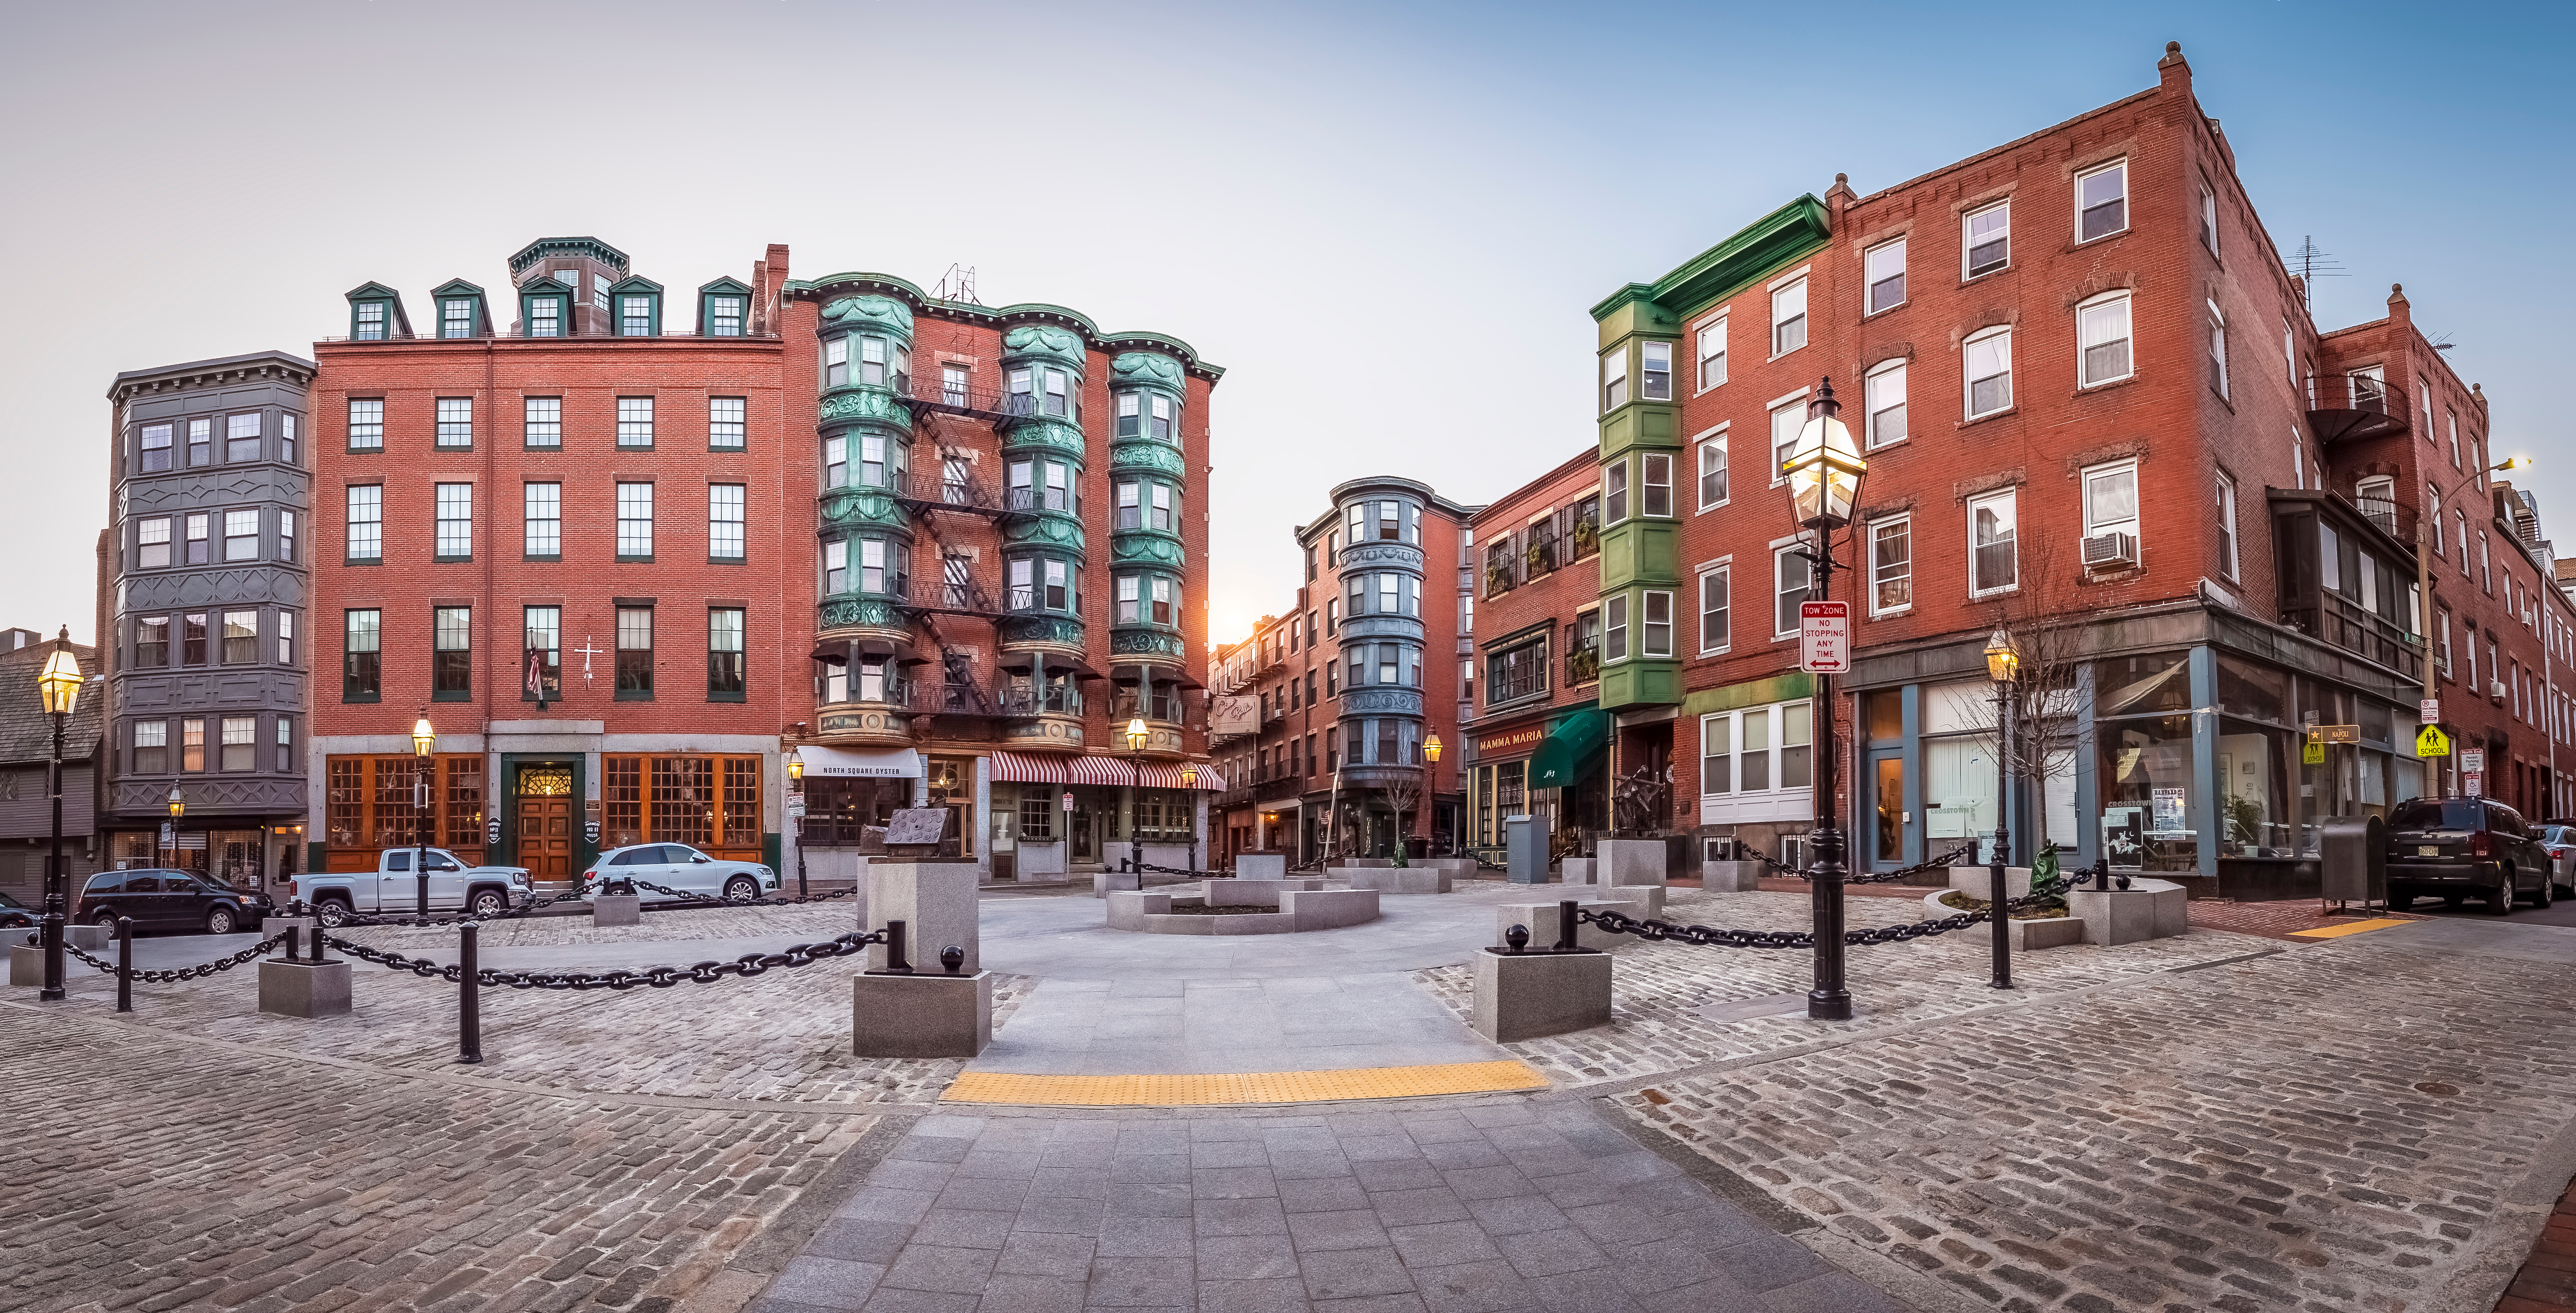 A wide shot, outdoors, of one of Boston’s oldest neighborhoods, showing the architecture and empty streets